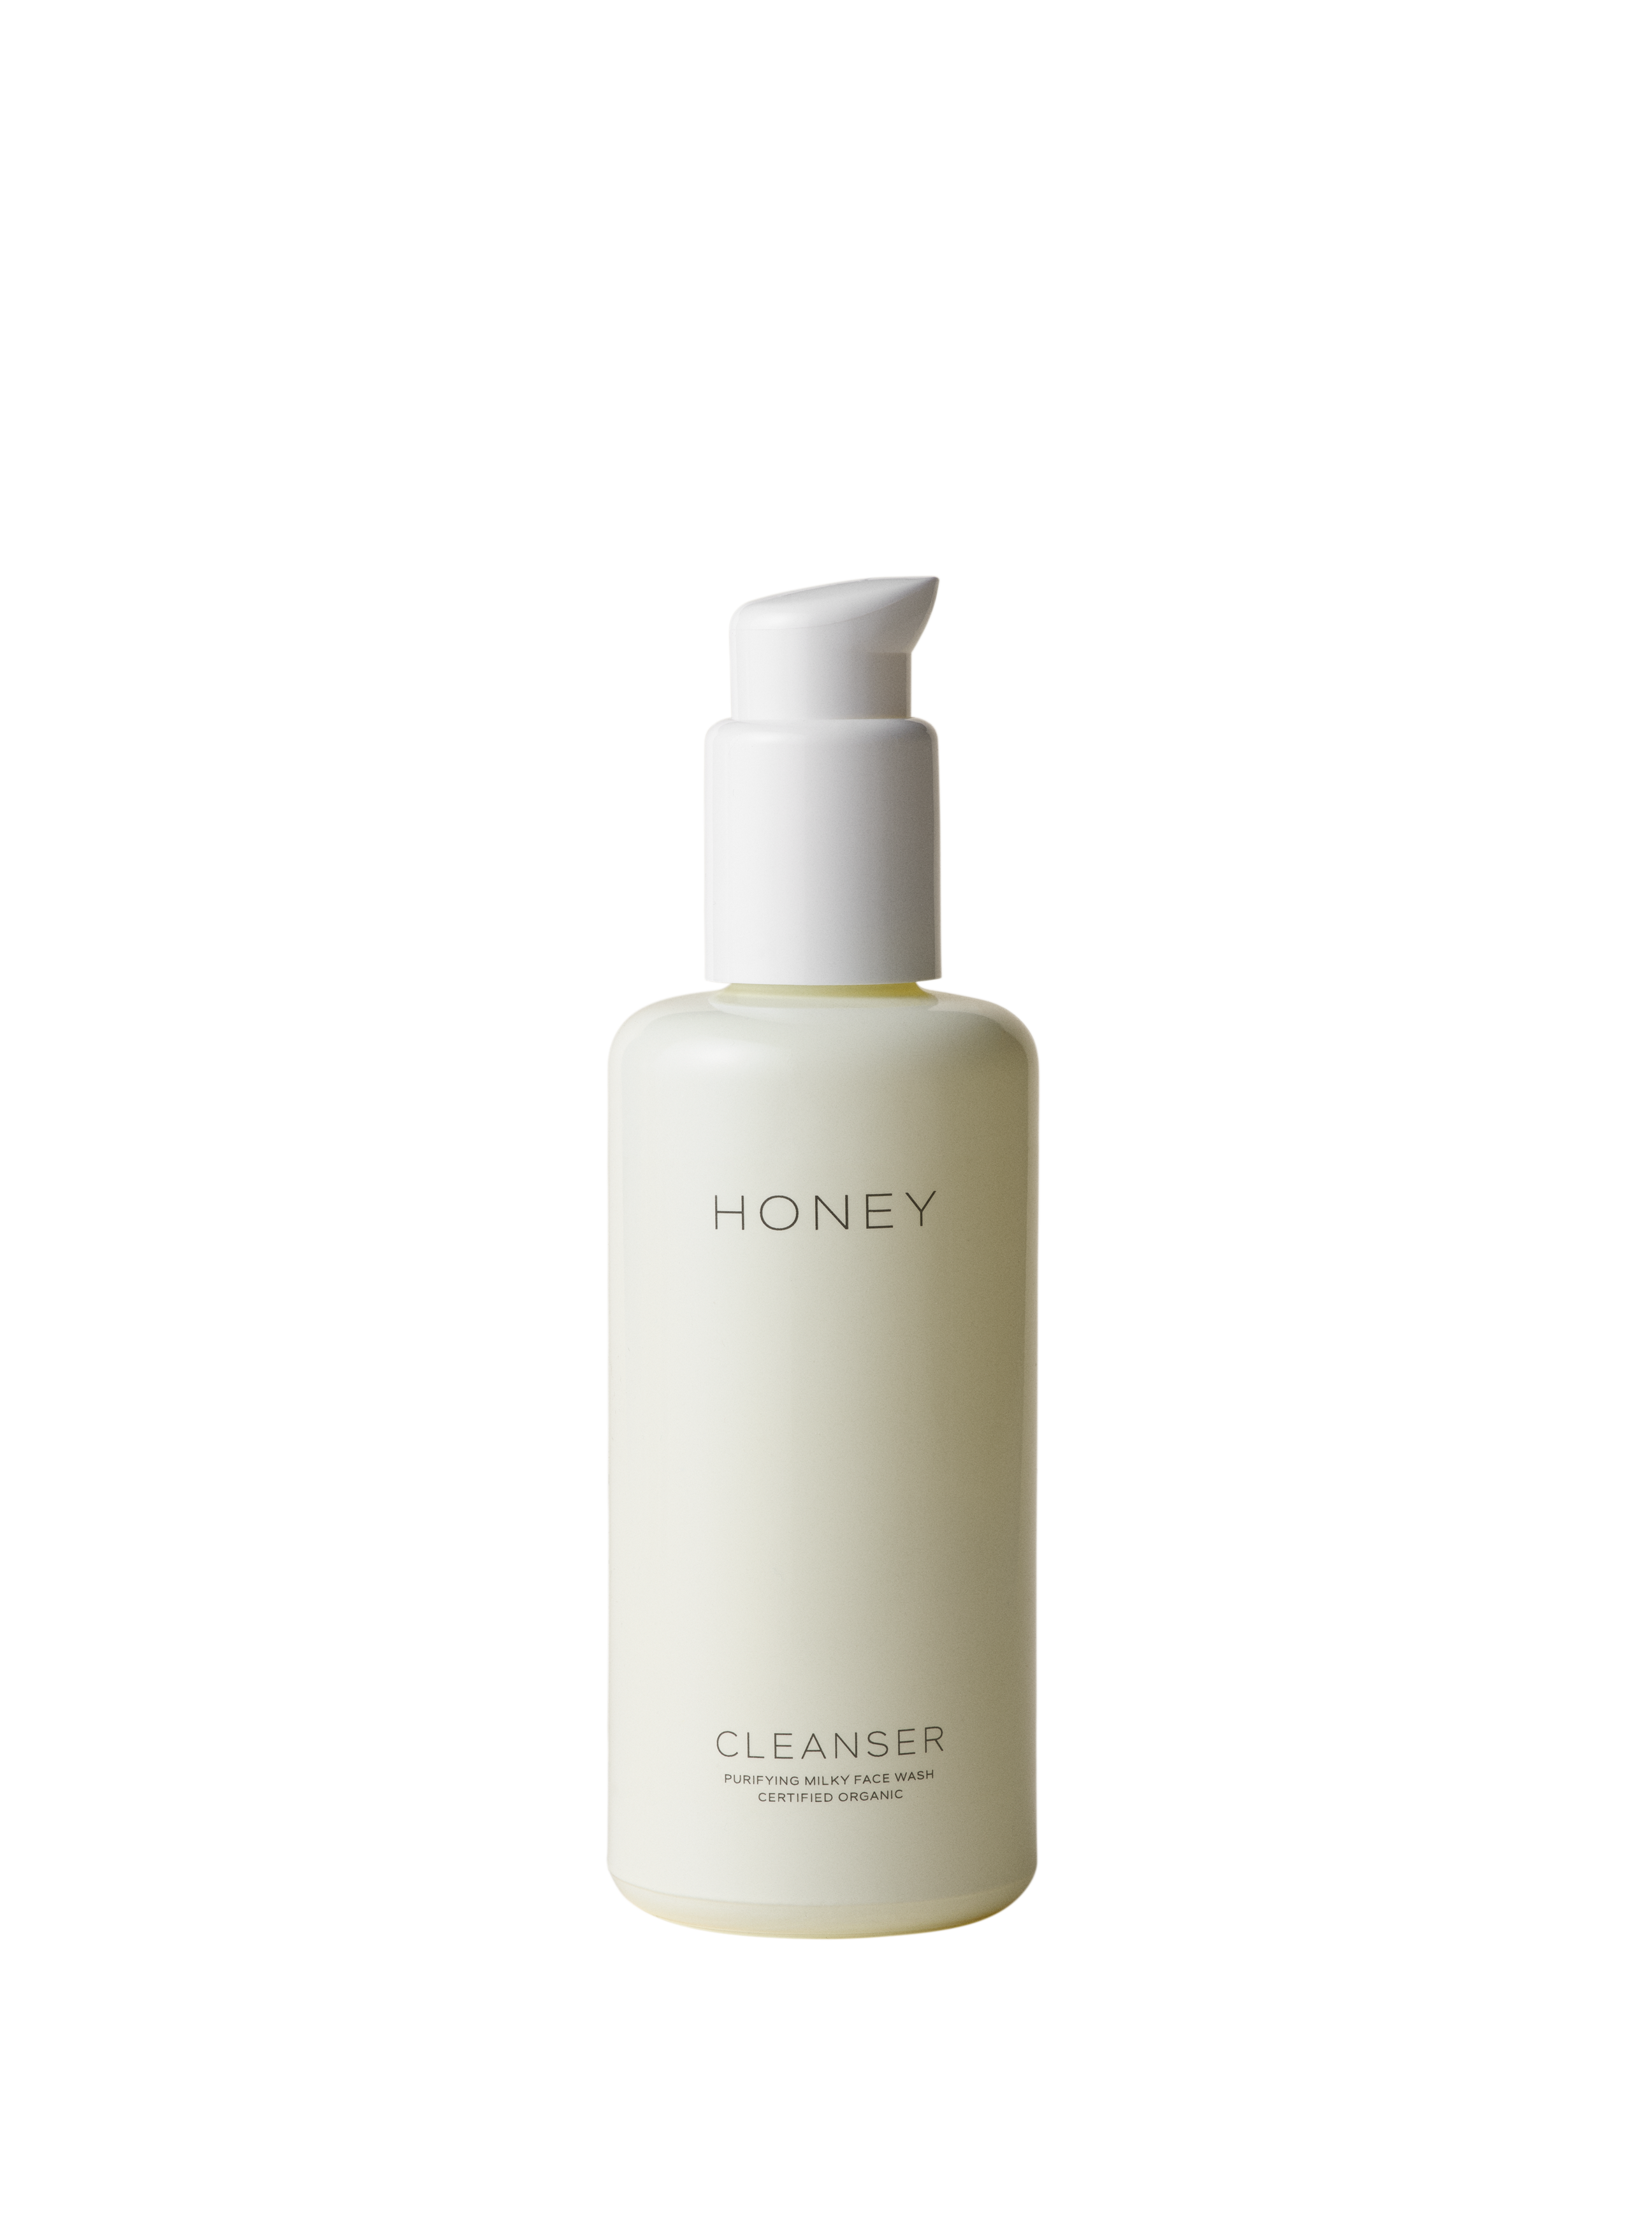 HONEY Cleanser • Purifying face wash